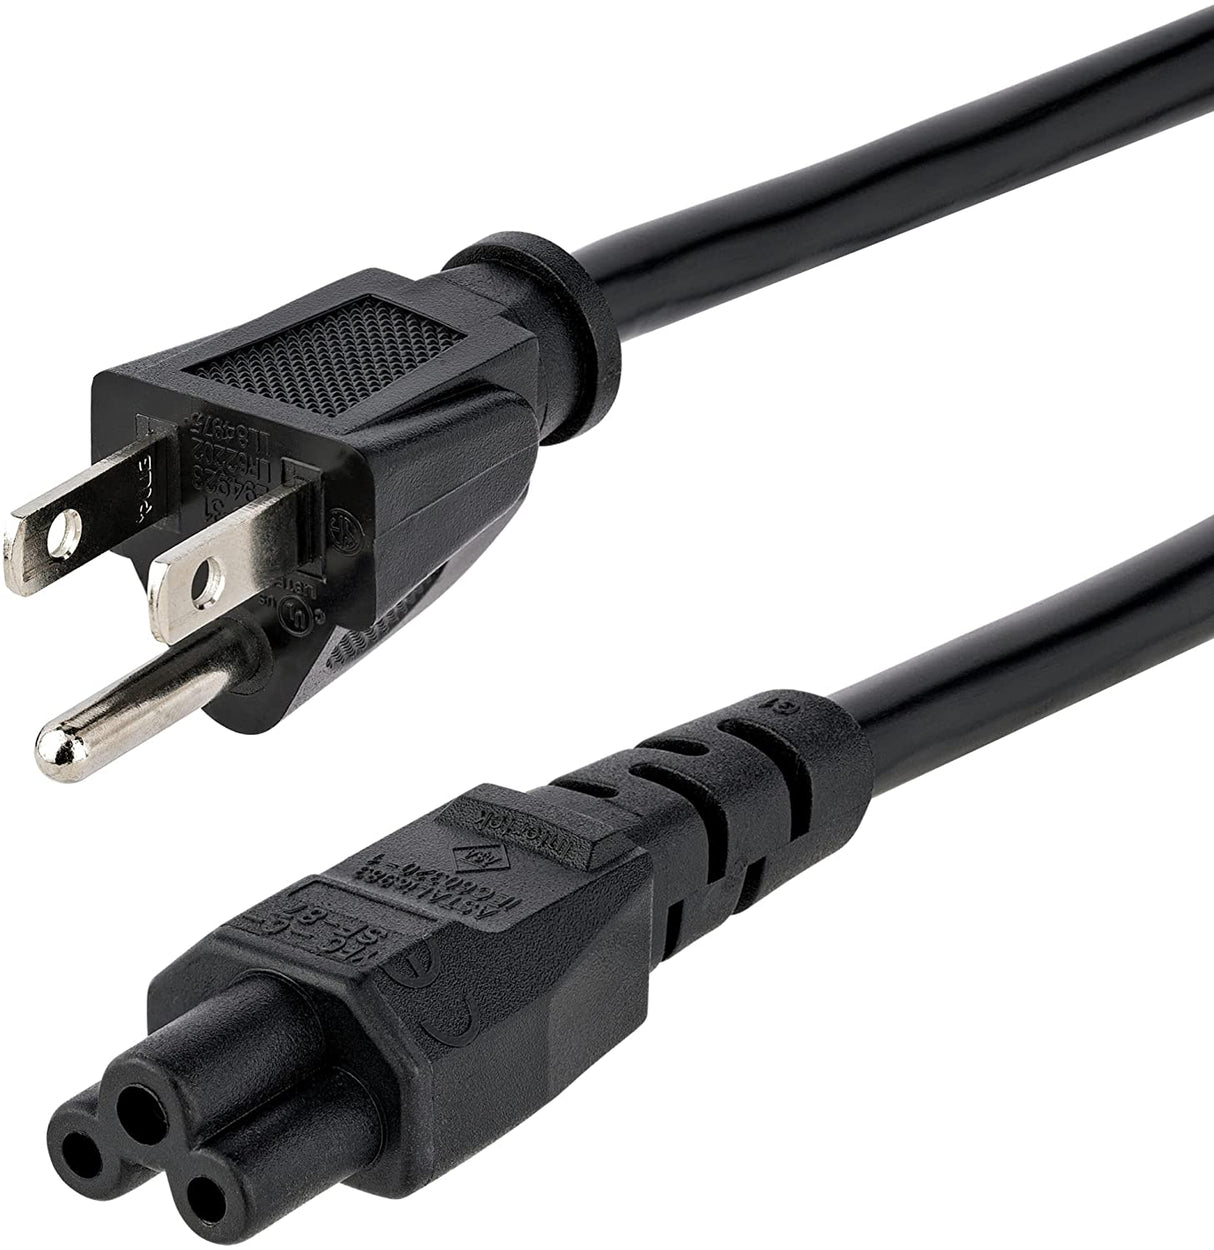 StarTech.com 10ft (3m) Laptop Power Cord, NEMA5-15P to C5 Mickey Mouse, 10A 125V, 18AWG, Laptop Replacement Cord, Printer Cable, Laptop Charger Cord, Laptop Power Brick Cord - UL Listed (PXT101NB3S10) 10 ft / 3m Standard